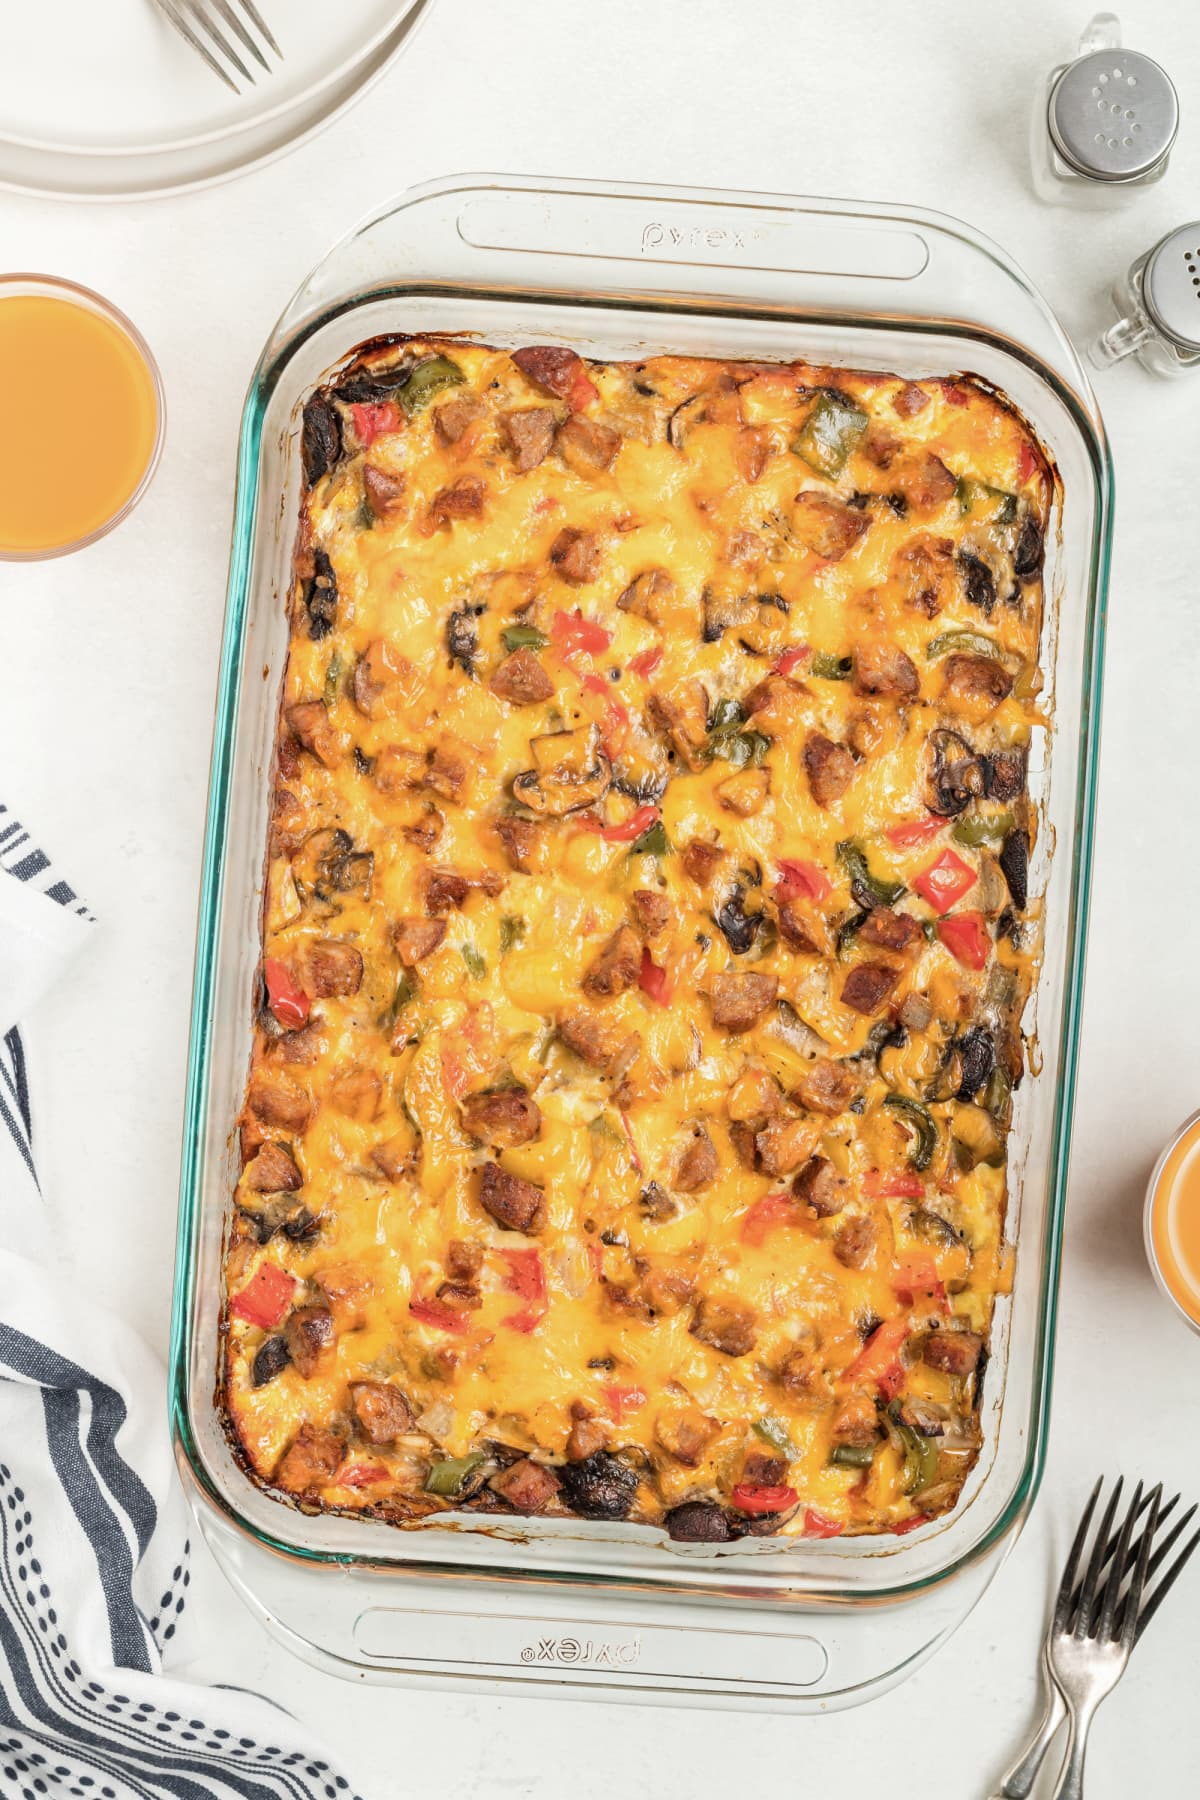 Sausage Egg And Cheese Breakfast Casserole baked in glass pan